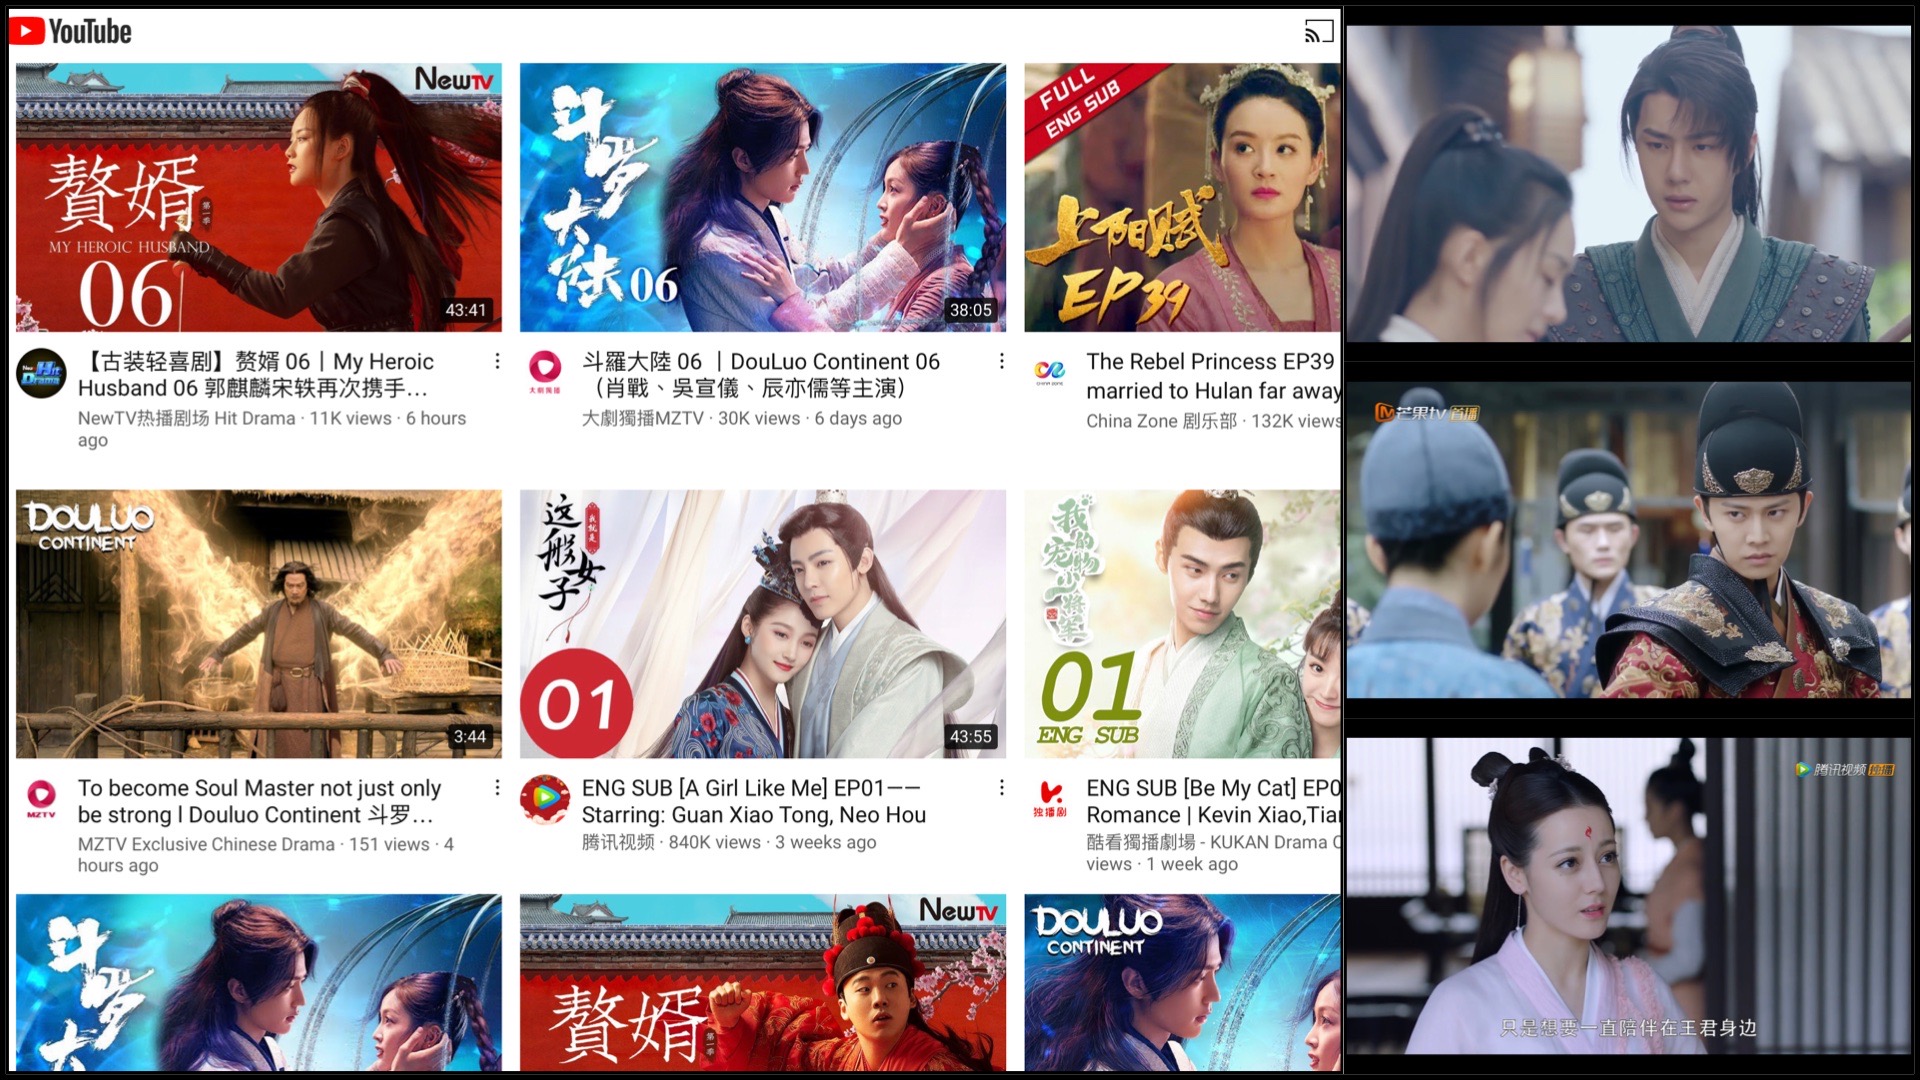 Discover more Chinese Dramas - Our Favourite Streaming Apps